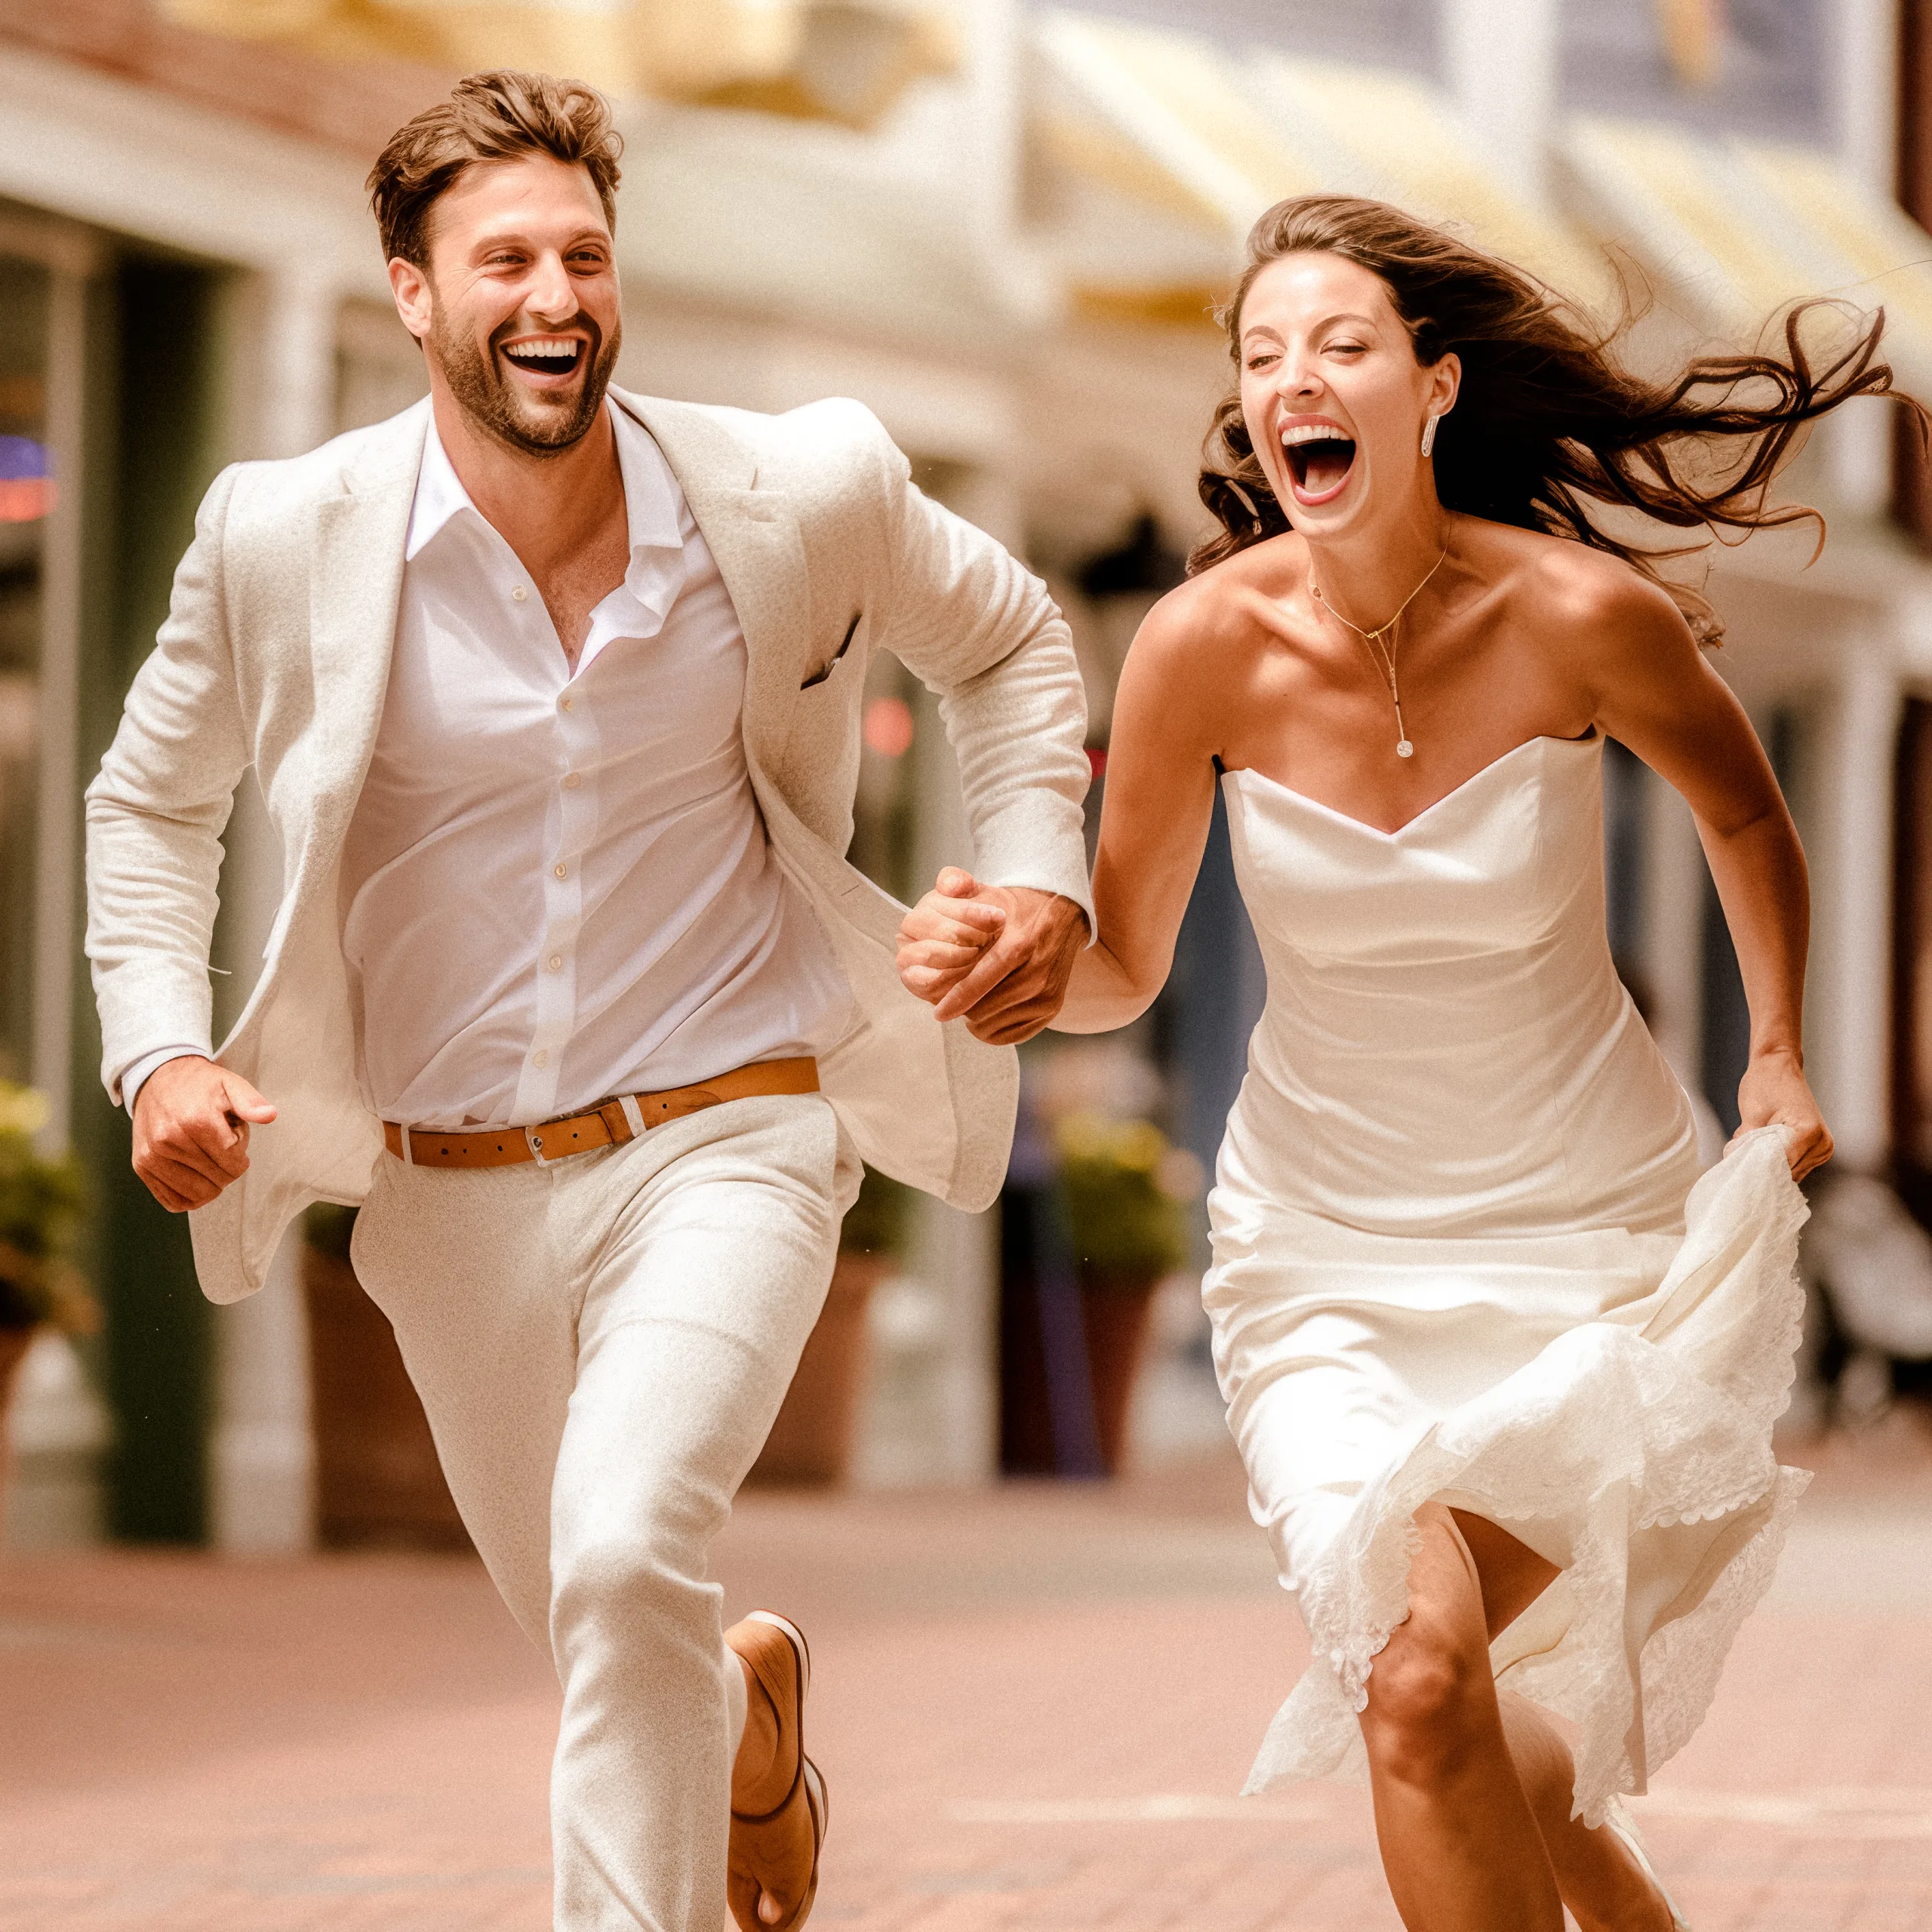 I want to start as a Wedding Photographer: Wedding Couple running